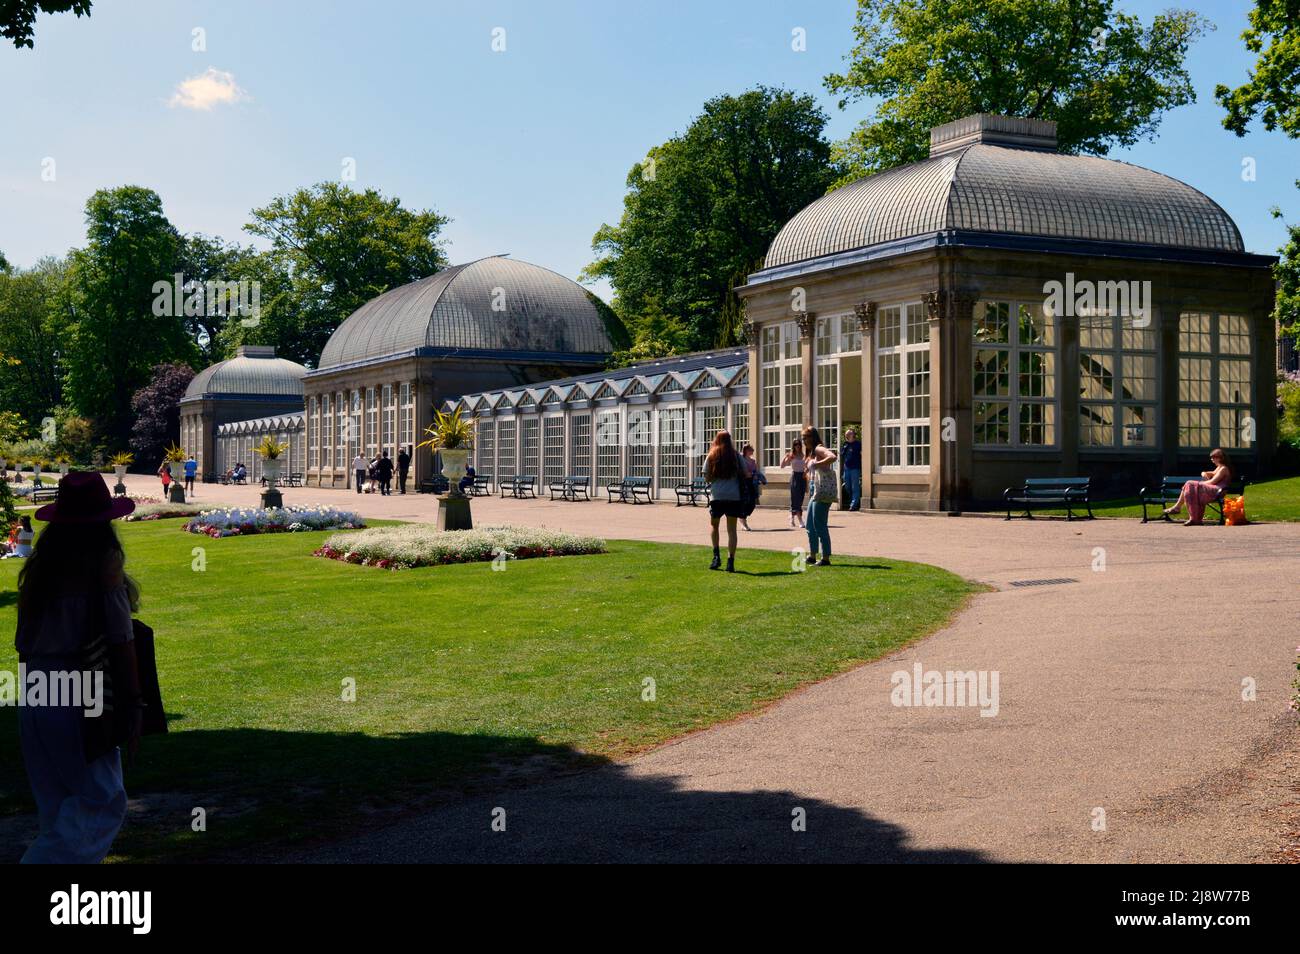 SHEFFIELD. SOUTH YORKSHIRE. ENGLAND. 05-14-22. The Botanical Gardens Conservatory, housing displays of tropical plants and also used a venue. Stock Photo